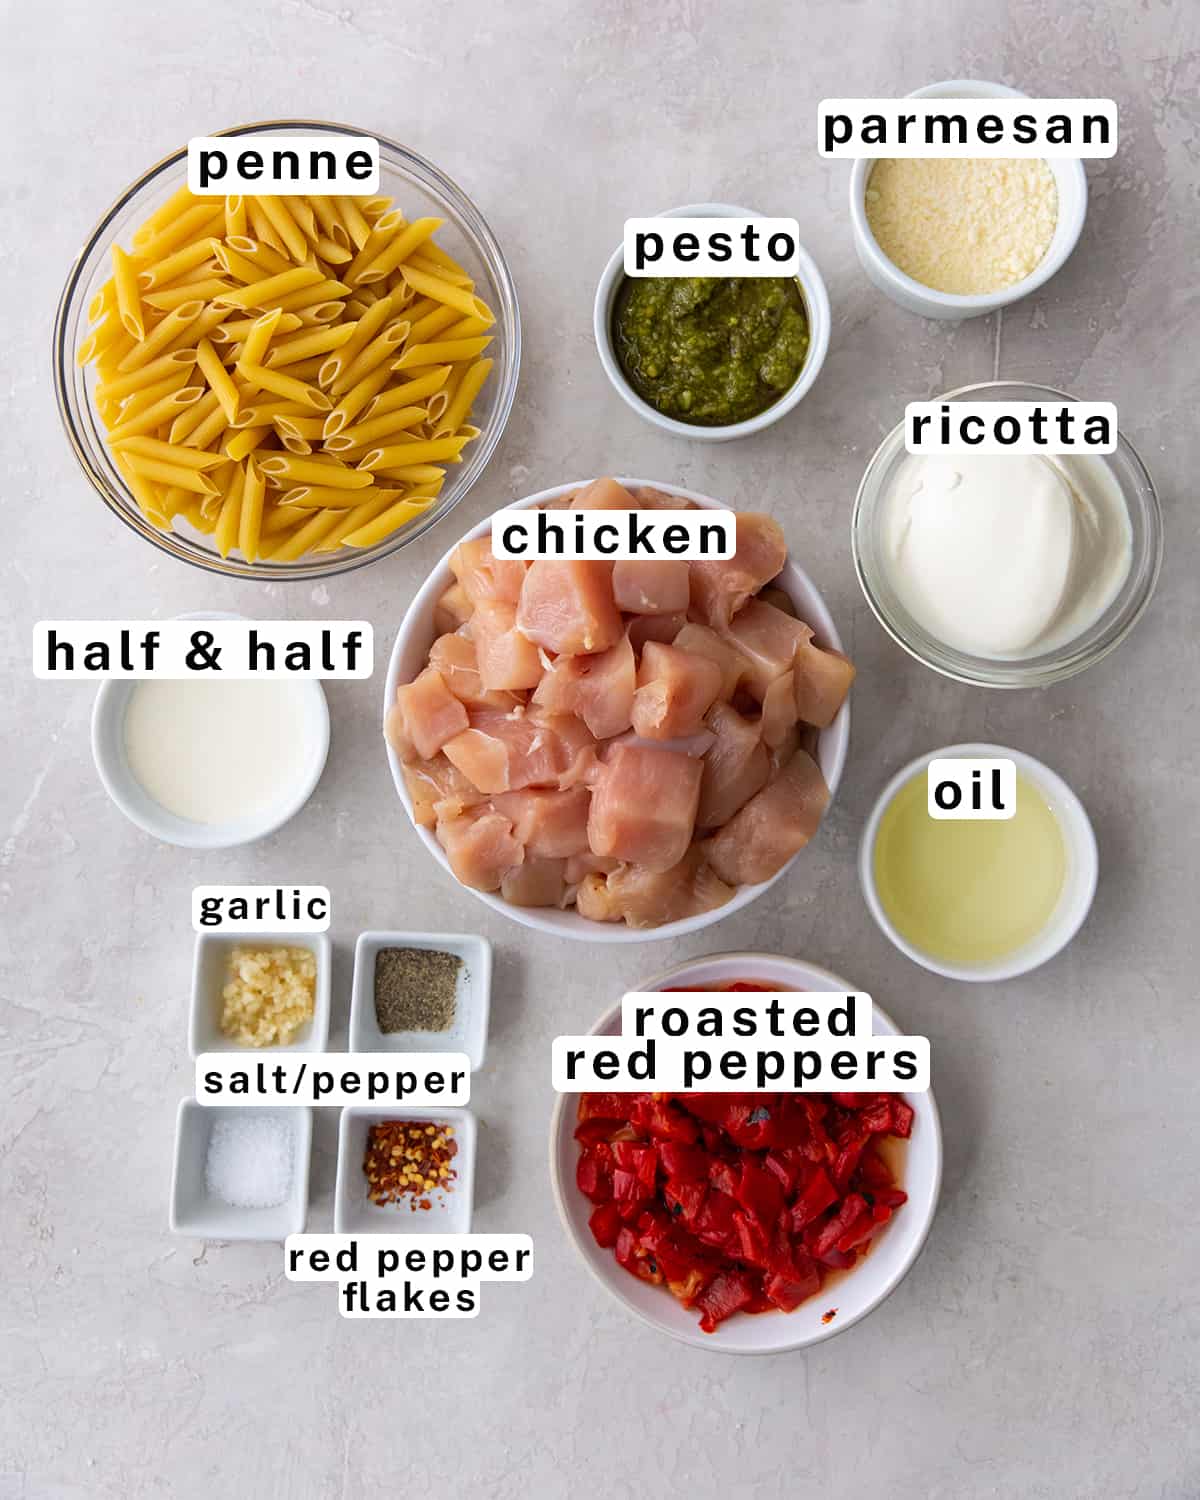 The ingredients for Chicken Pesto Pasta with text overlay.